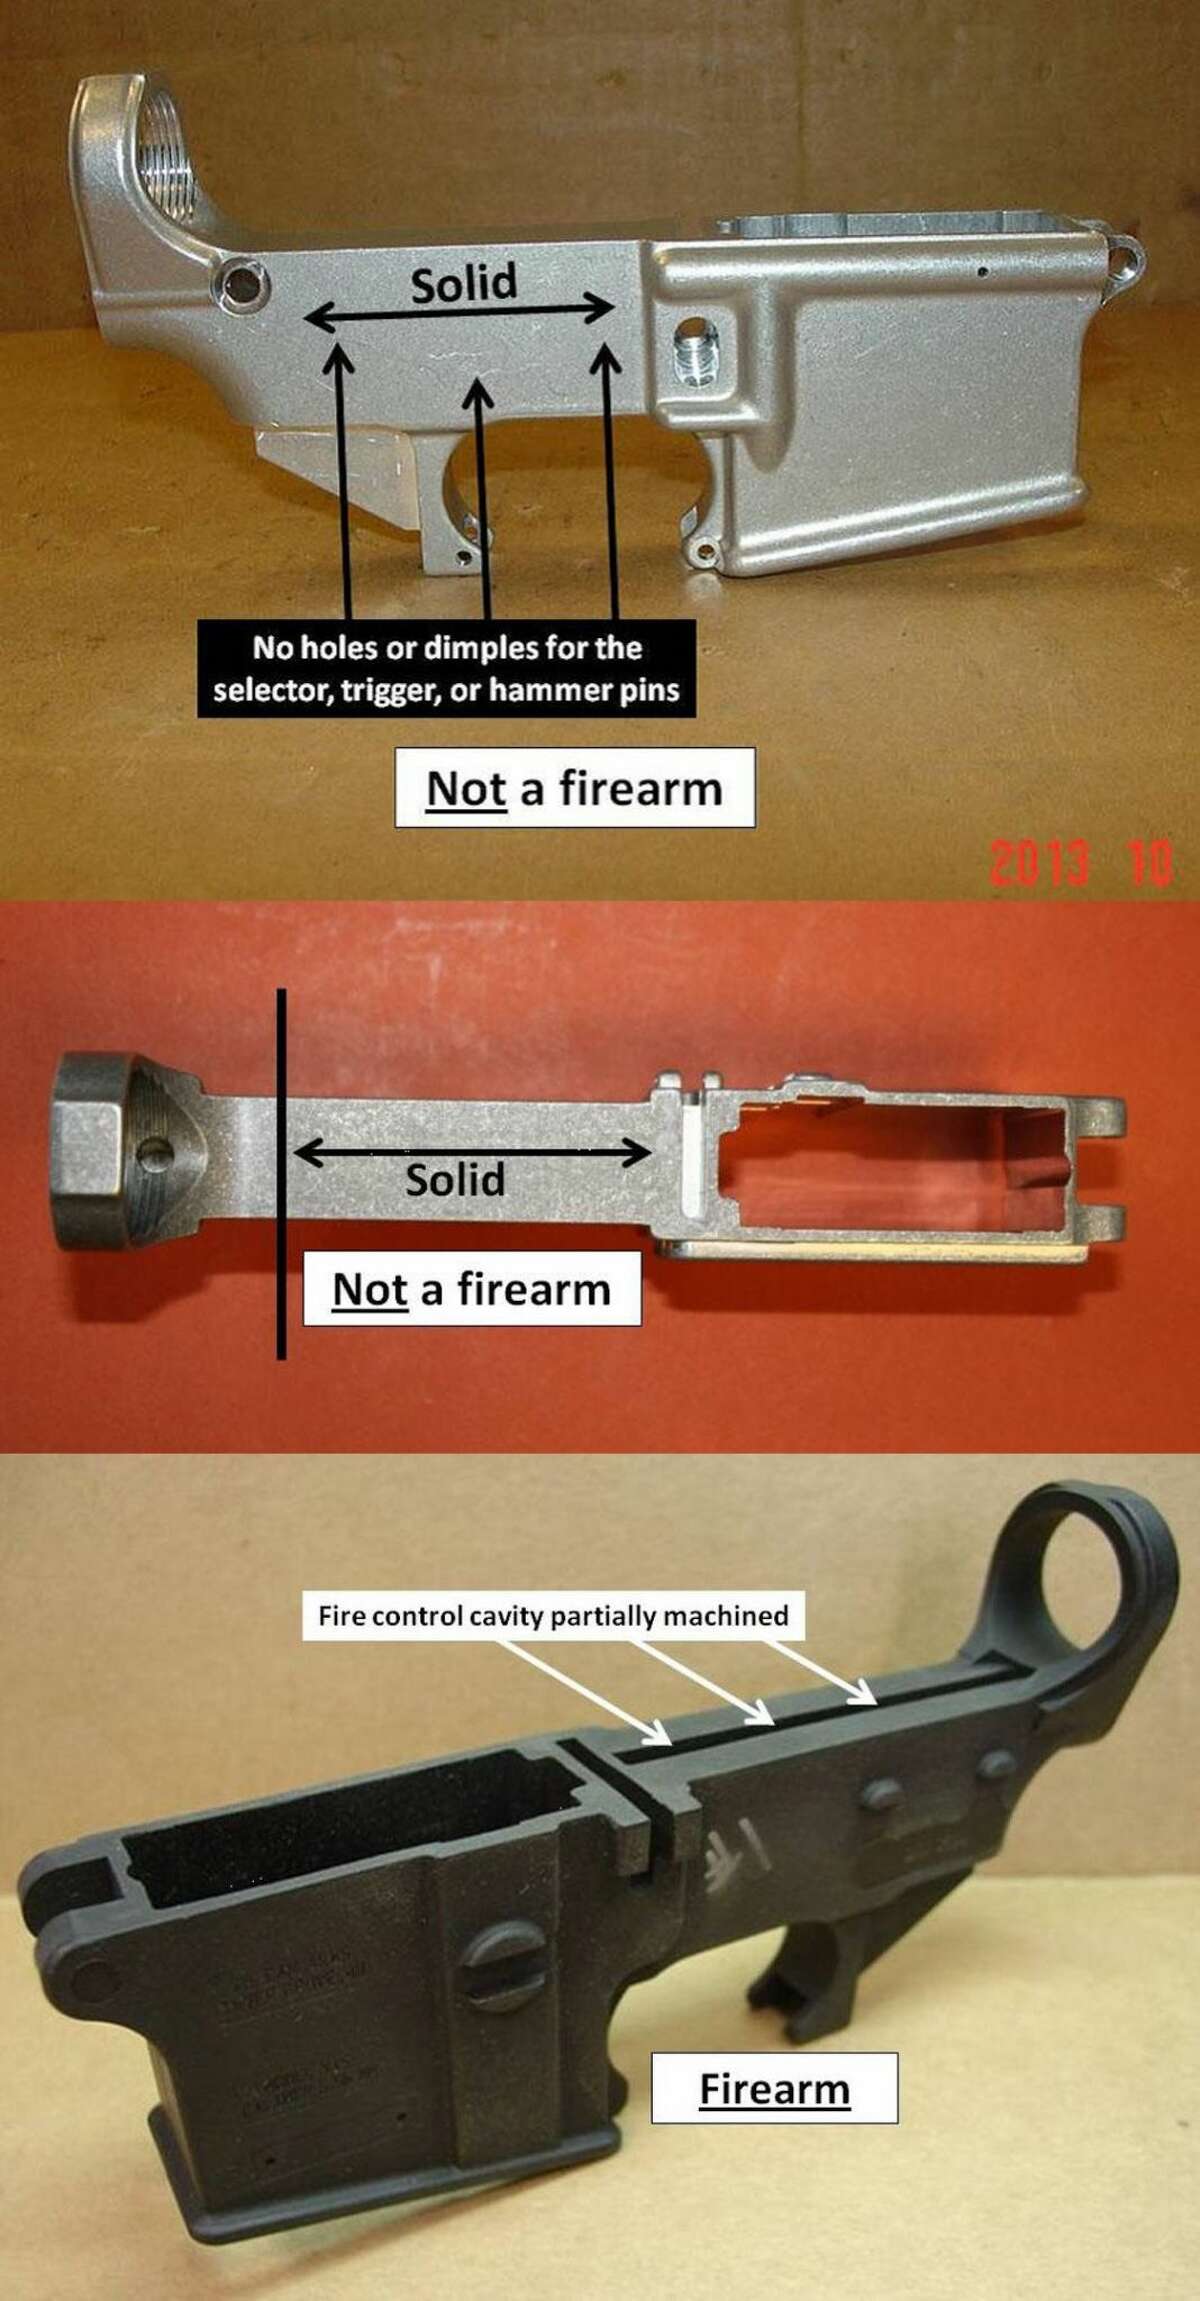 This image from the Bureau of Alcohol, Tobacco, Firearms and Explosives shows examples of a unfinished guns that are legally not considered a firearm, and one that would be considered a firearm.